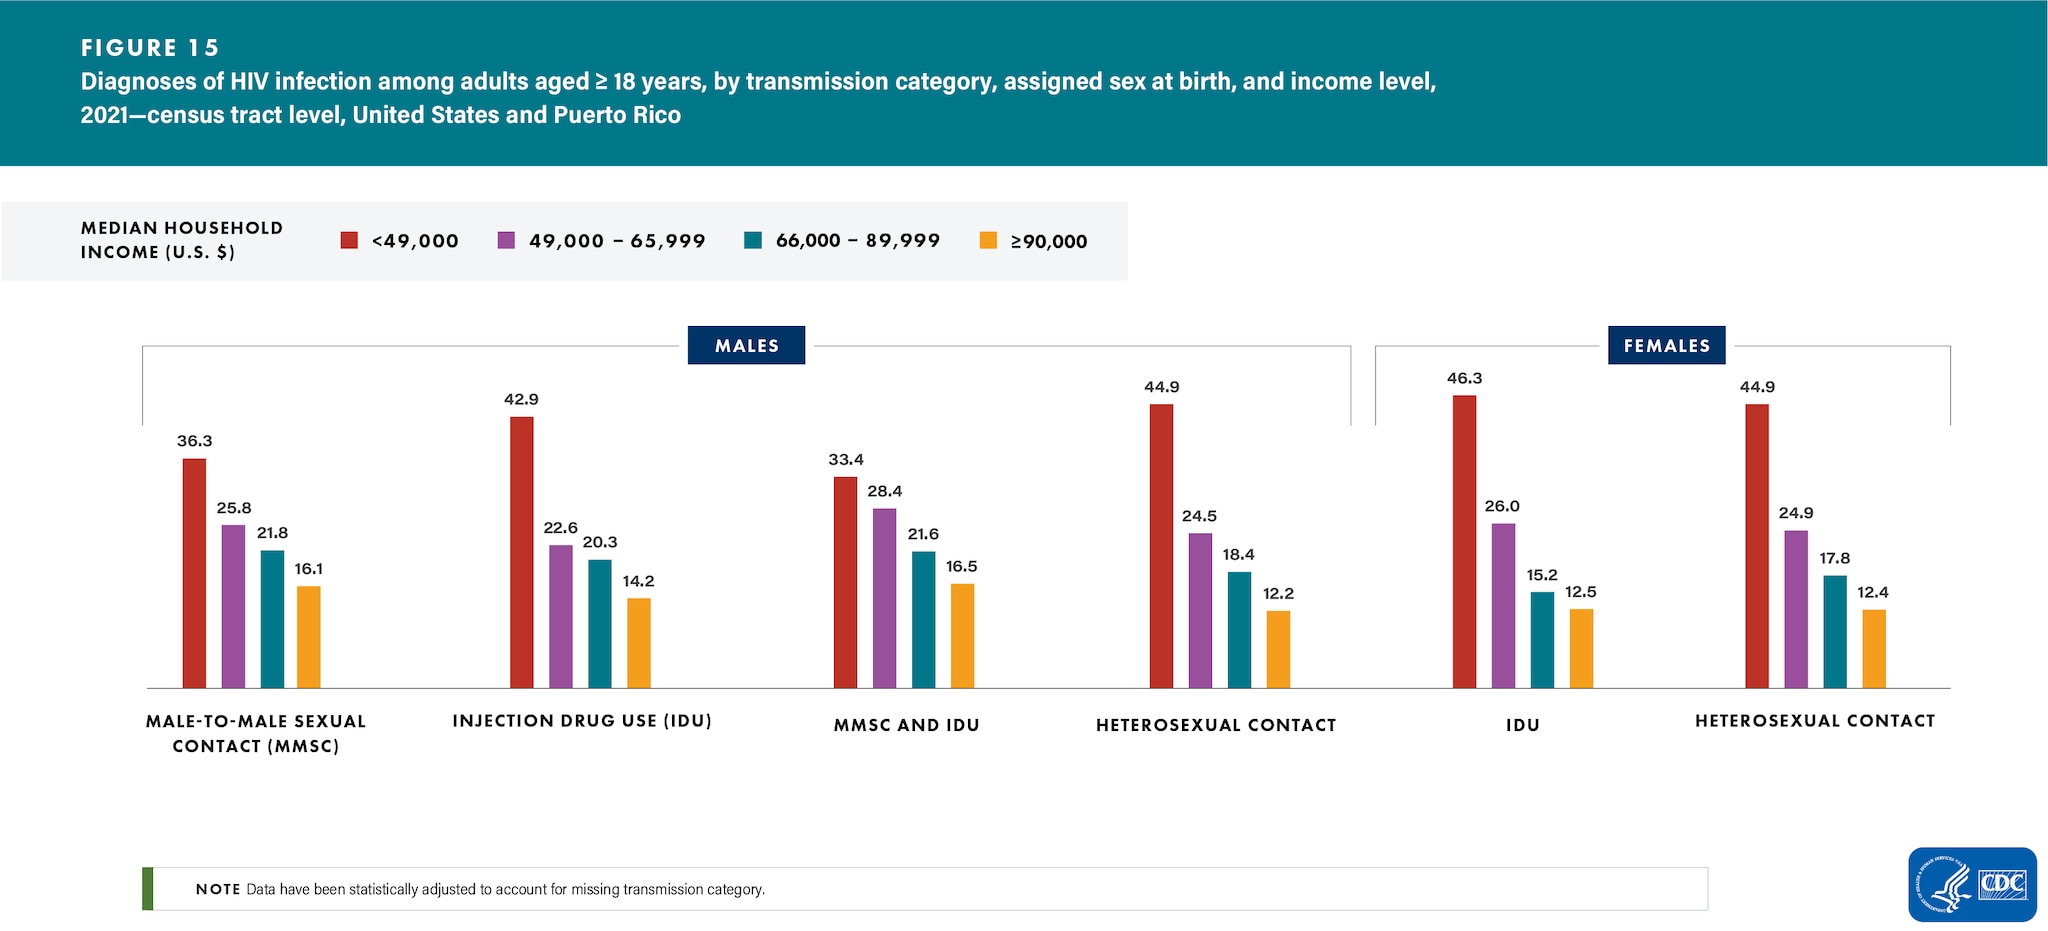 In 2021, adults who lived in census tracts with the lowest median household income (where the median household income was less than $49,000 a year) accounted for the highest percentages of HIV diagnoses among all transmission categories for both sexes.